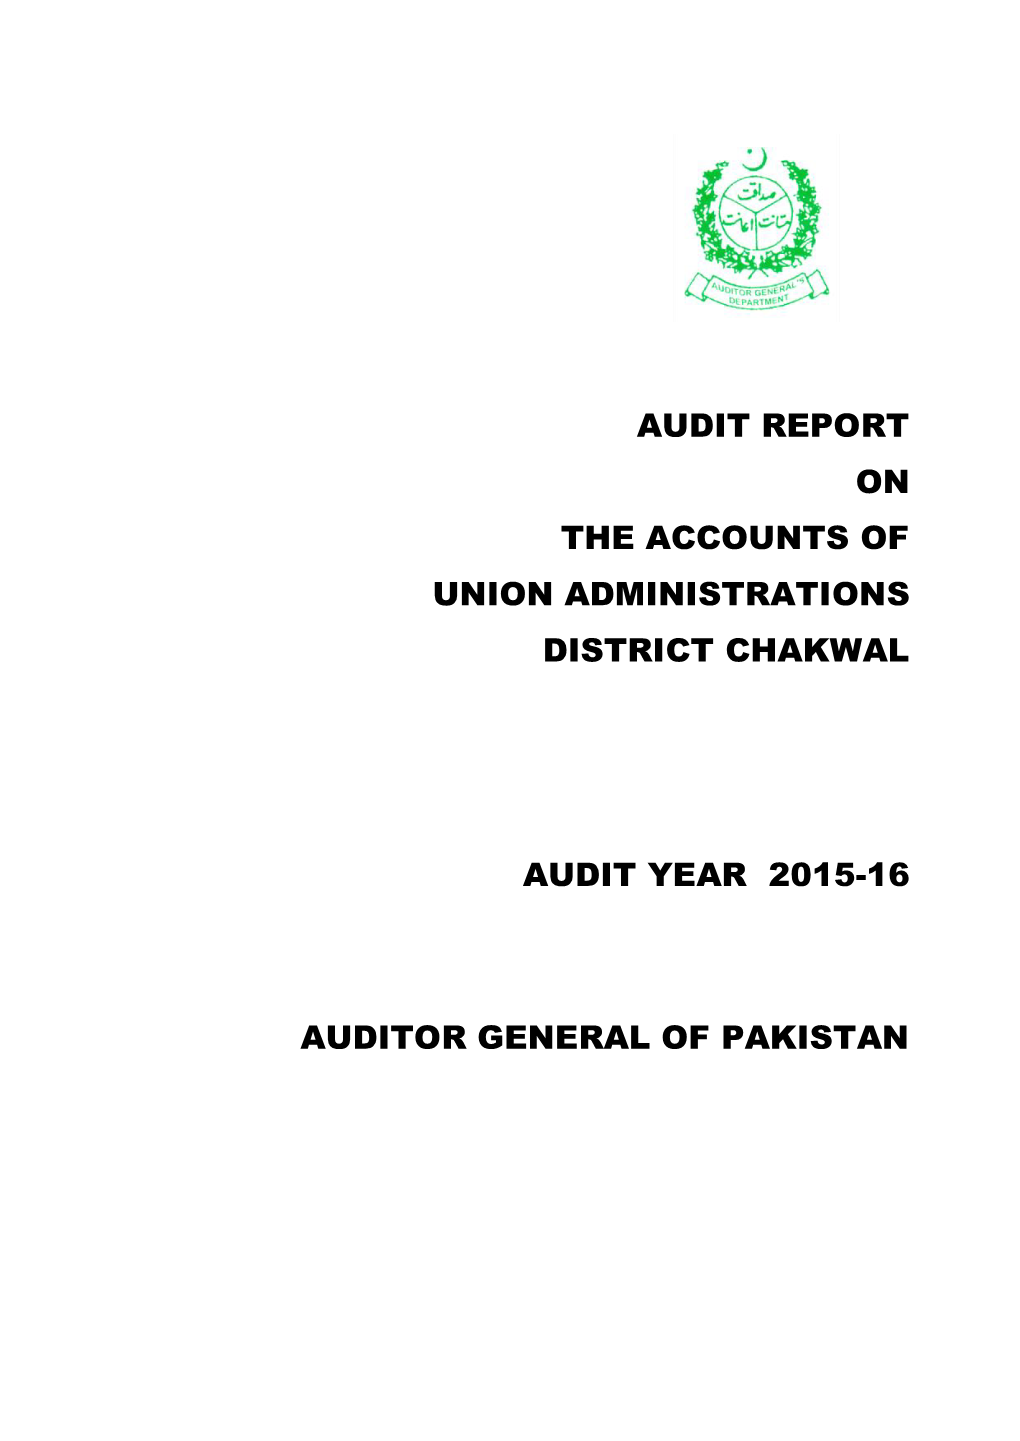 Audit Report on the Accounts of Union Administrations District Chakwal